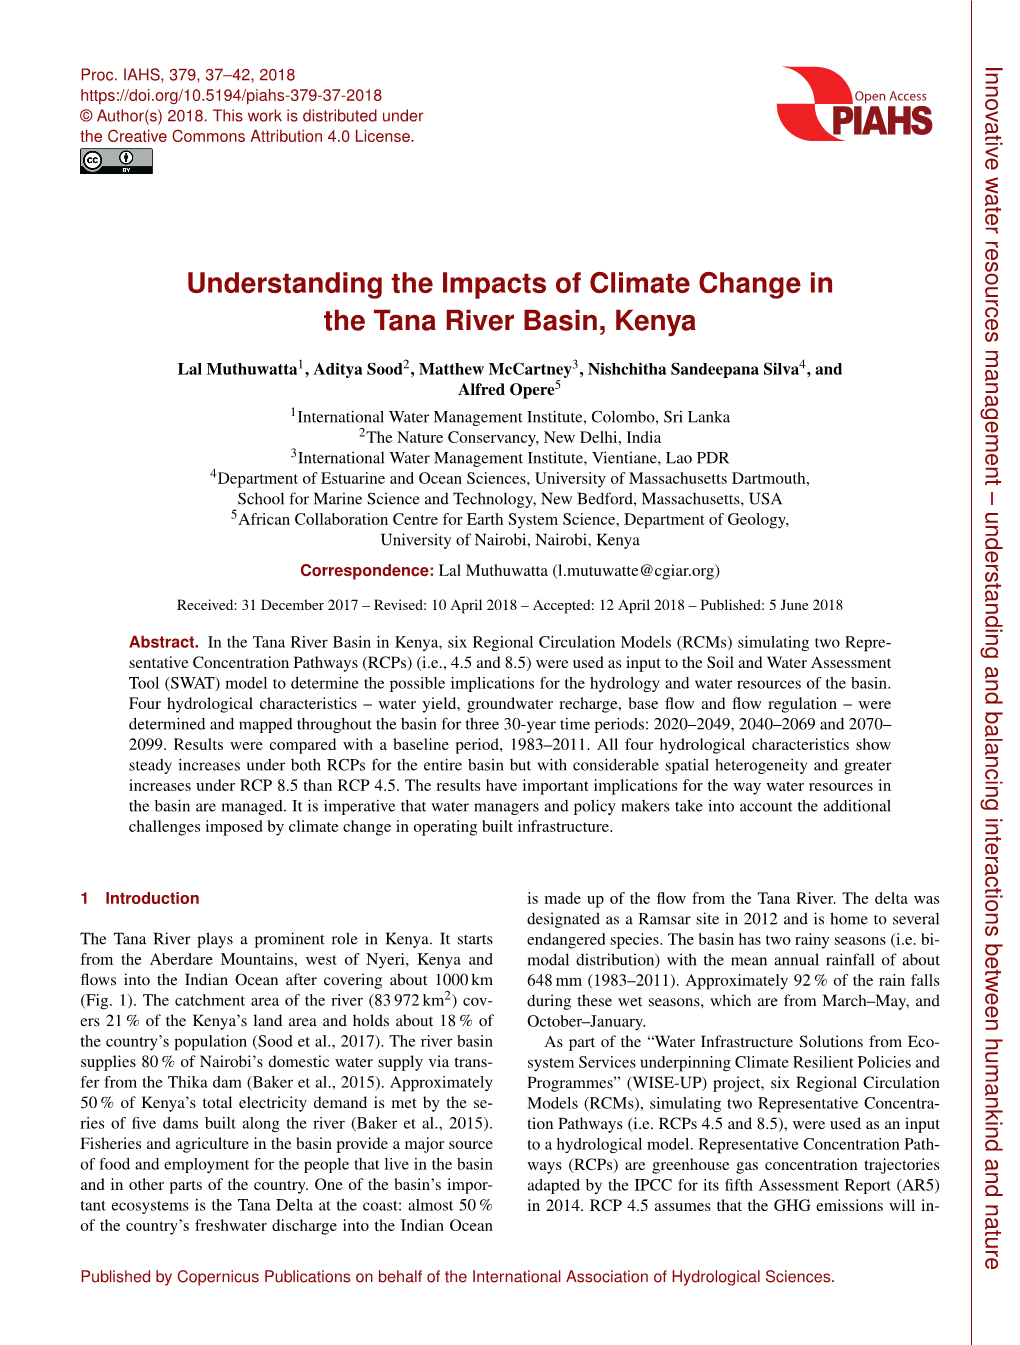 Understanding the Impacts of Climate Change in the Tana River Basin, Kenya